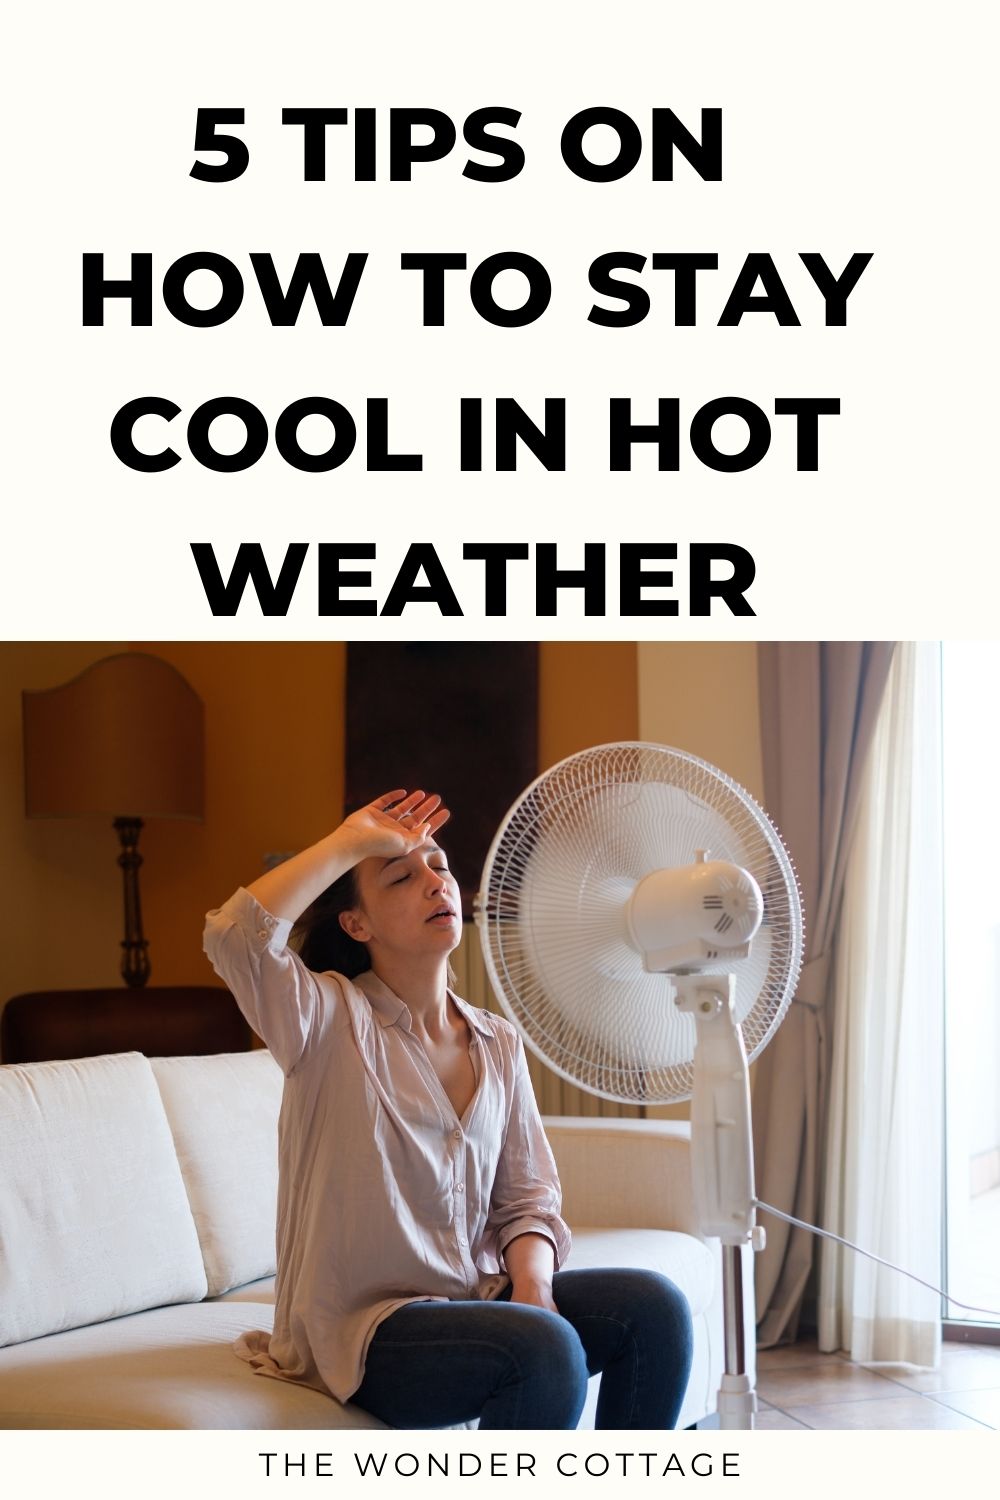 5 tips on how to stay cool in hot weather